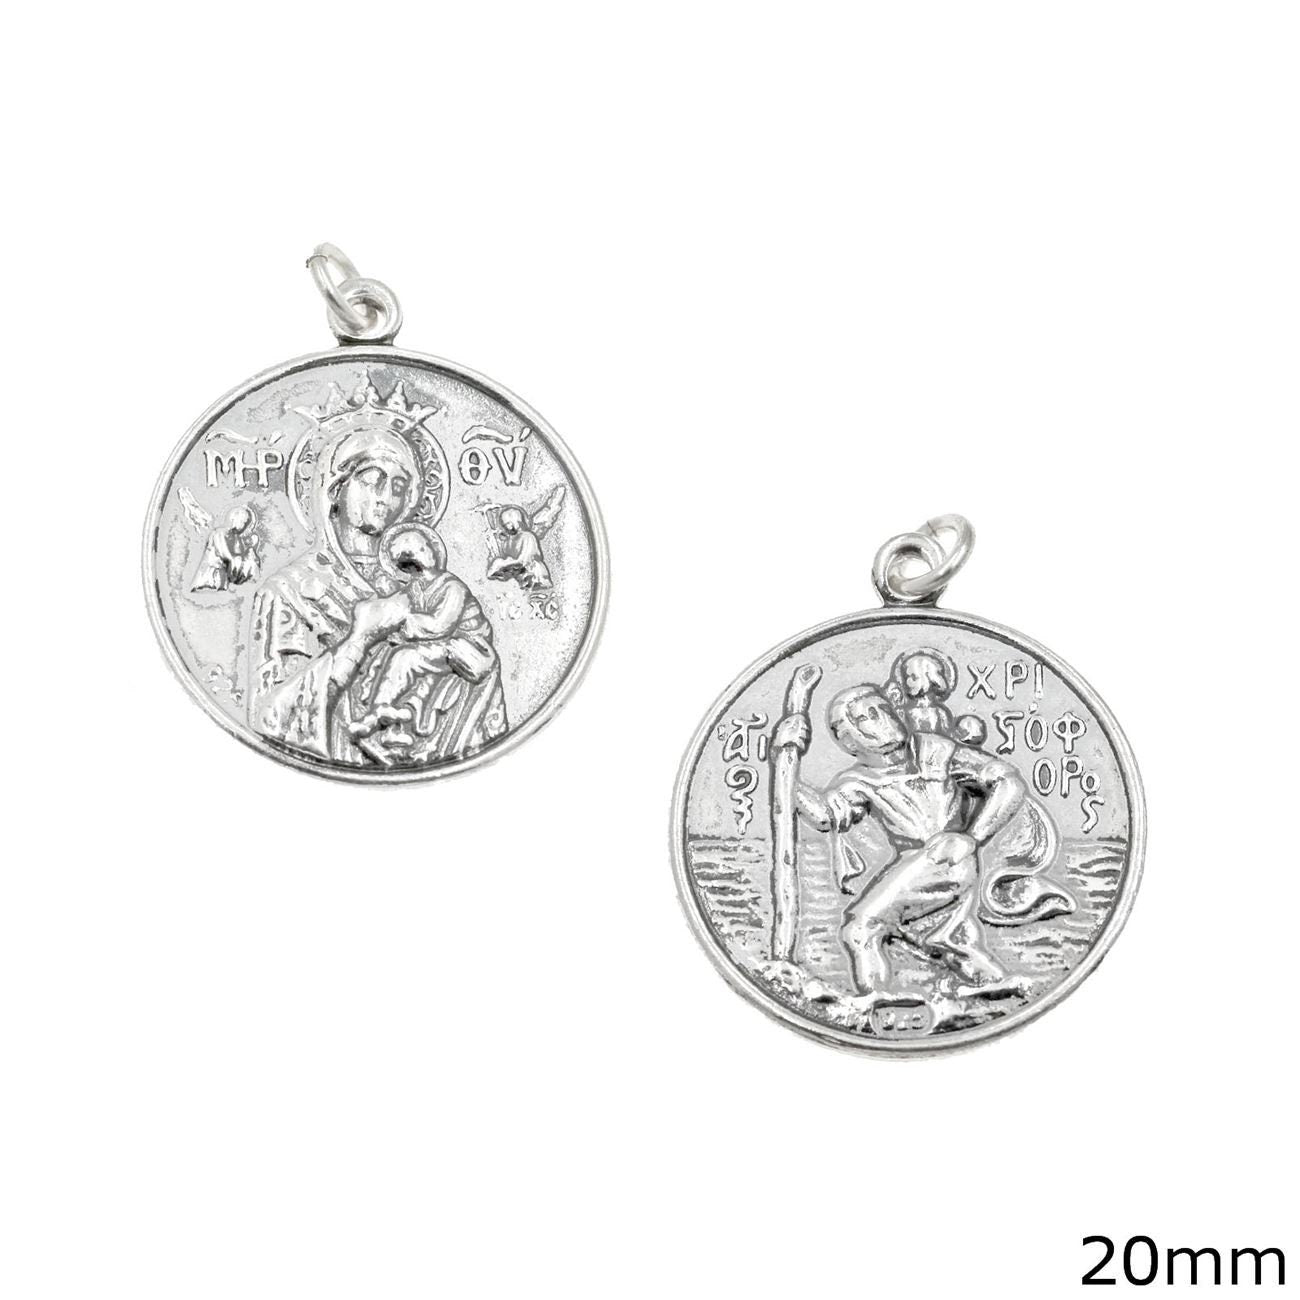 Virgin Mary & St Christopher Pendant  Necklace Religious Accessory Handmade Christian Jewelry Mother Mary 925 Sterling Silver Unisex gift